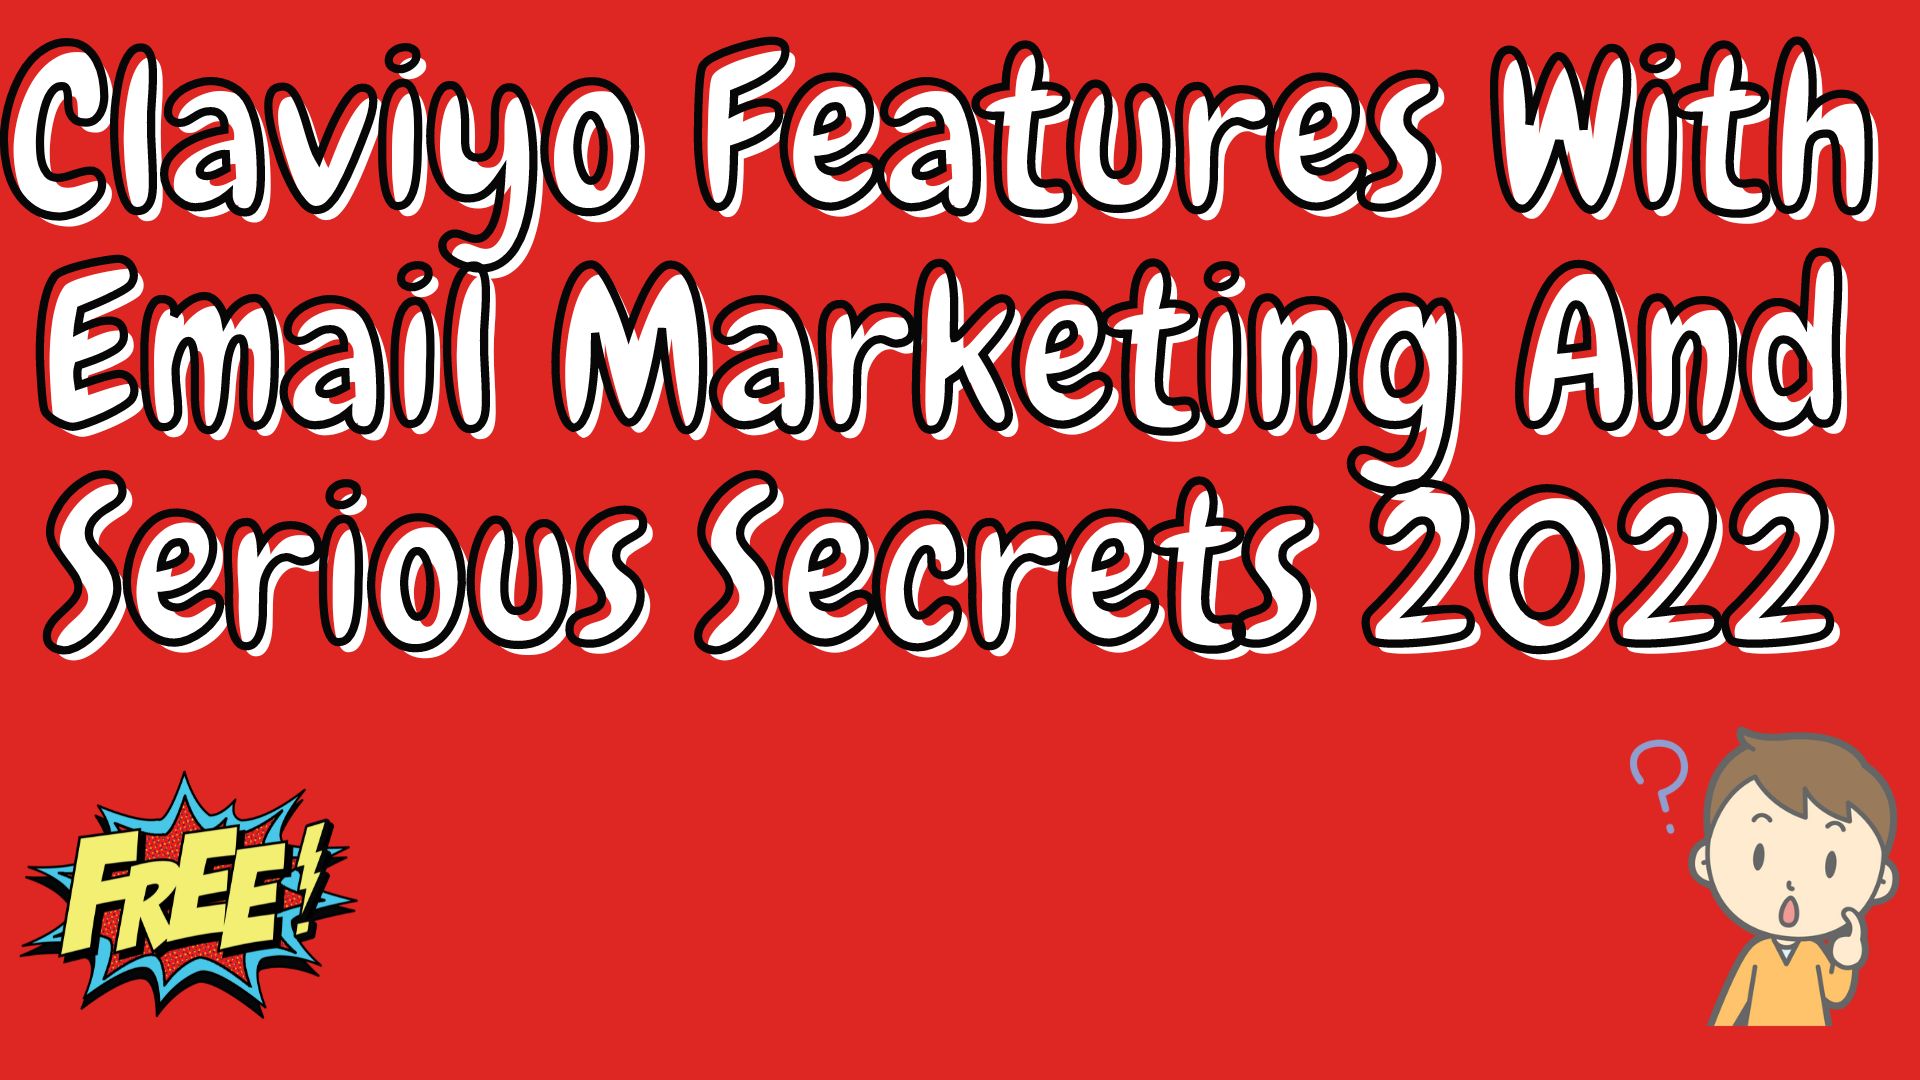 Claviyo features with email marketing and serious secrets 2022